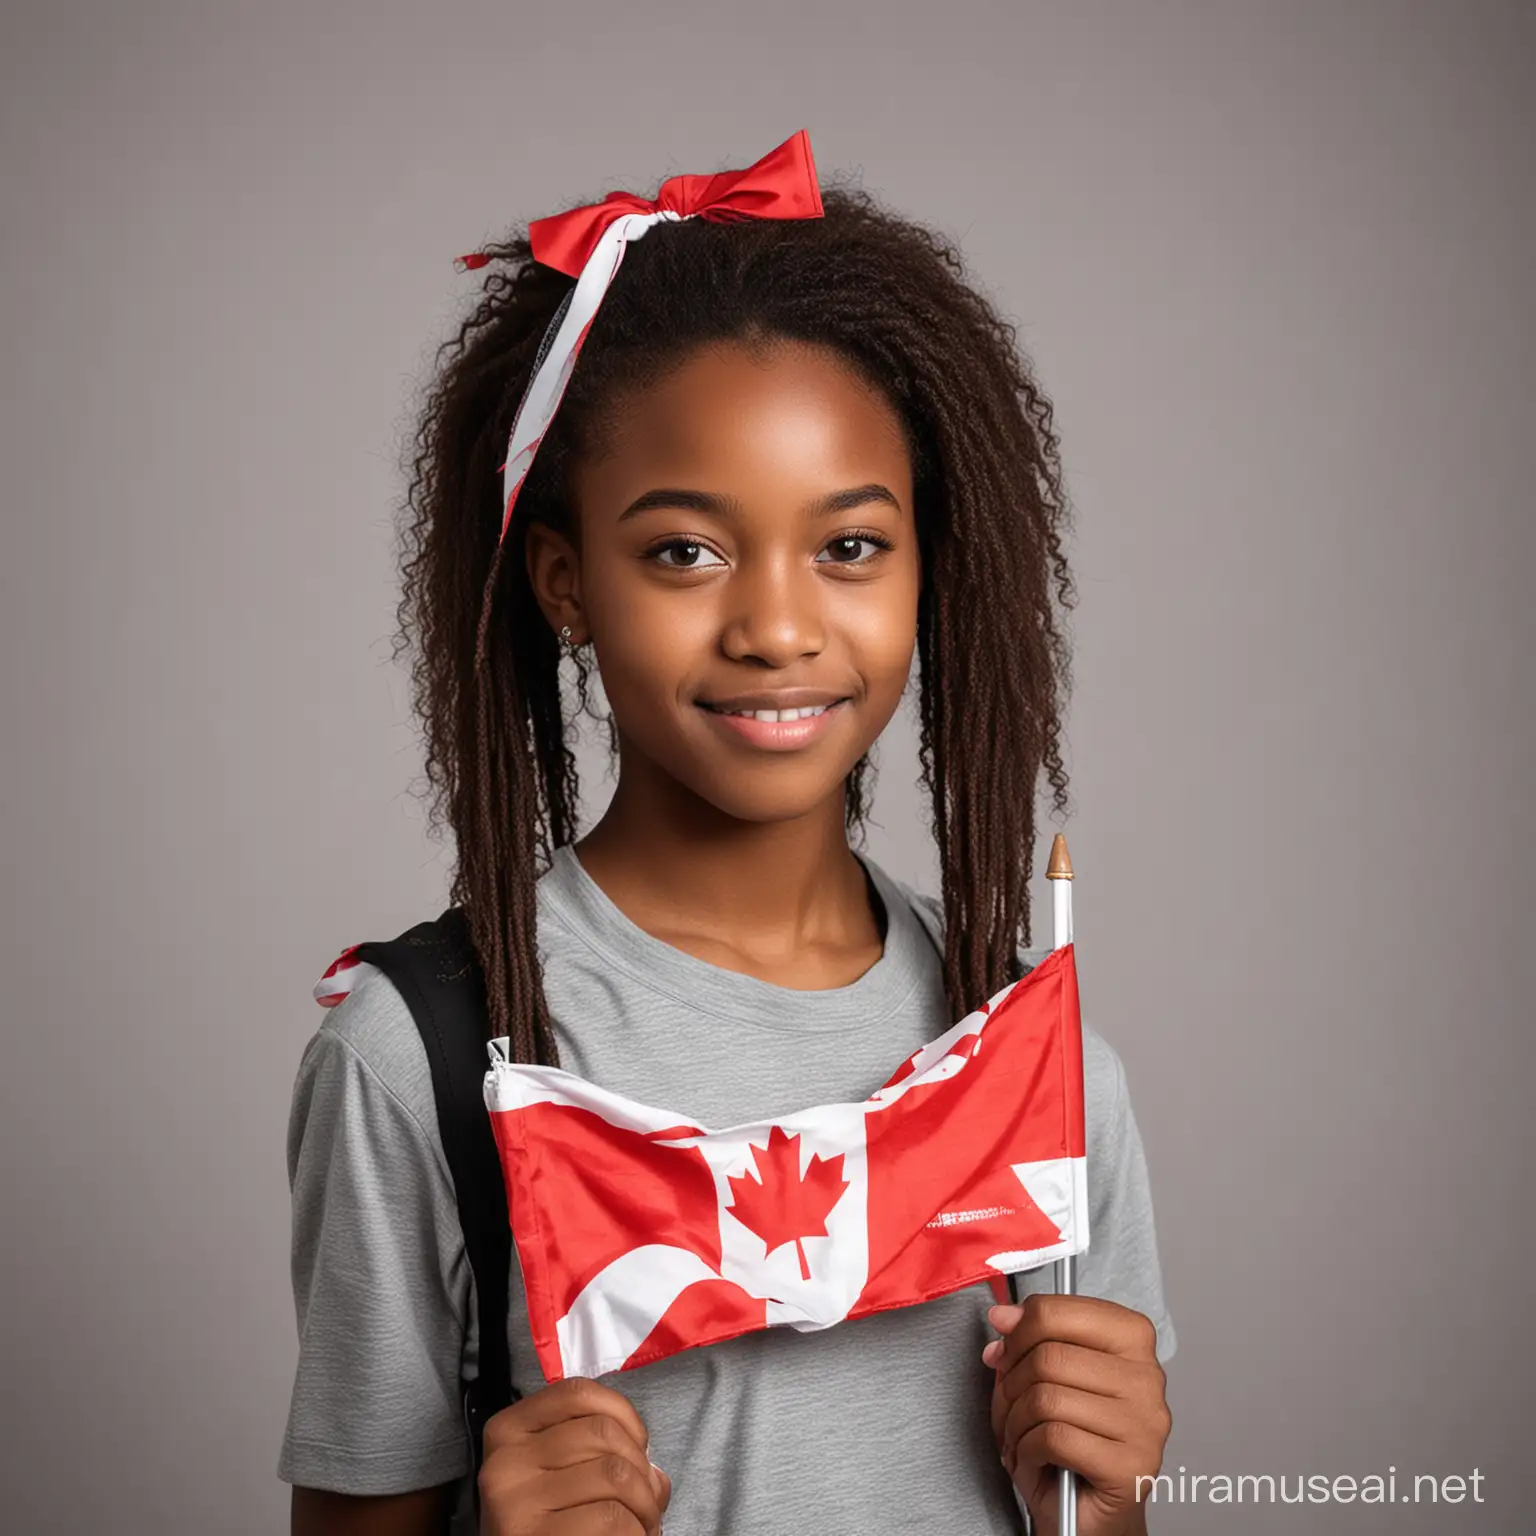 African Teenage Student Holding Canadian Flag